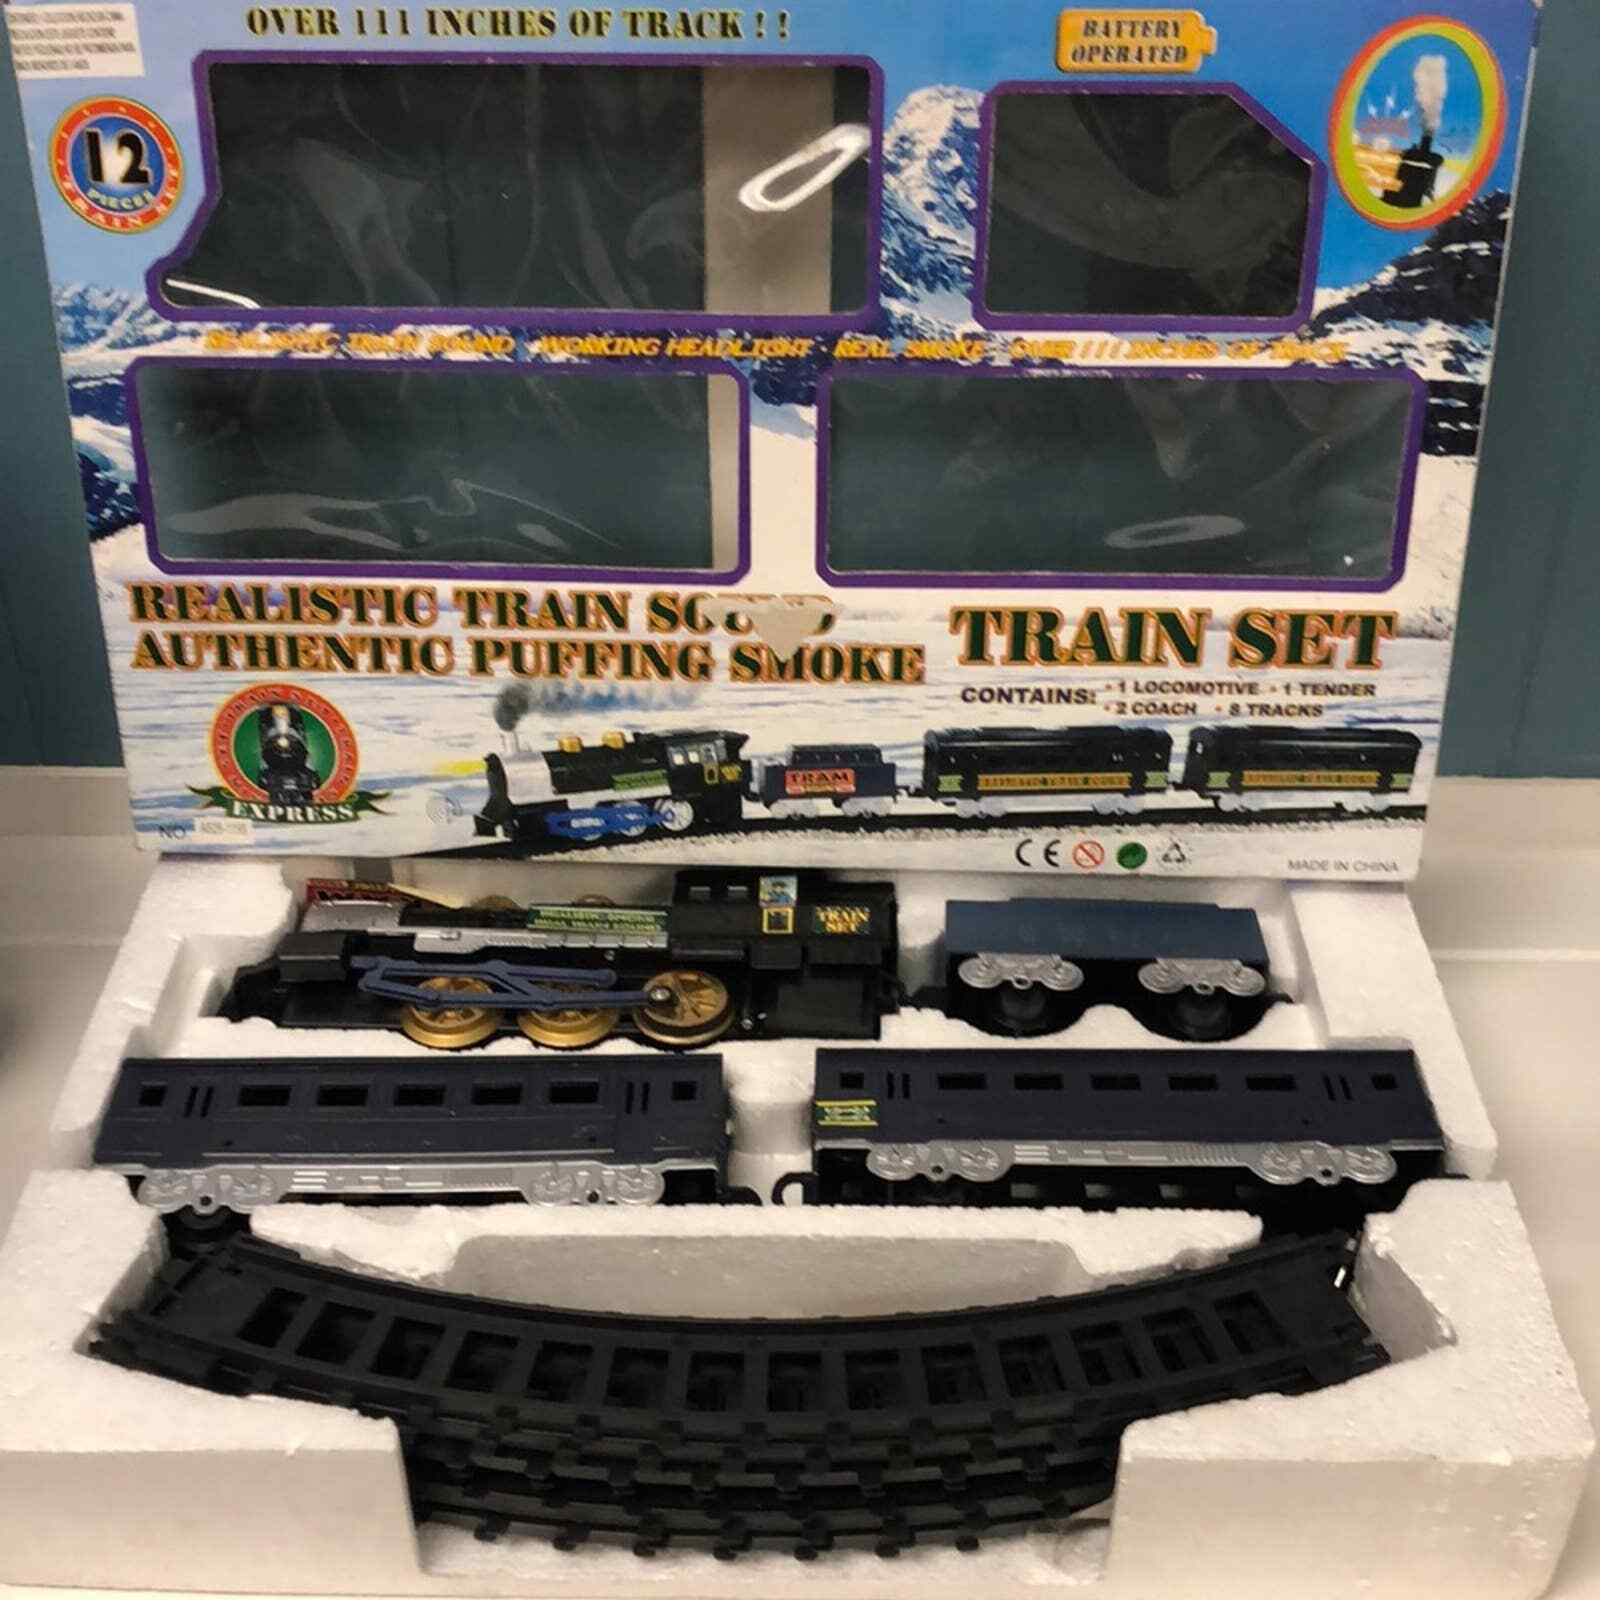 Classic Express Train Set realistic sound authentic puffing smoke + A626-1198 - $46.28